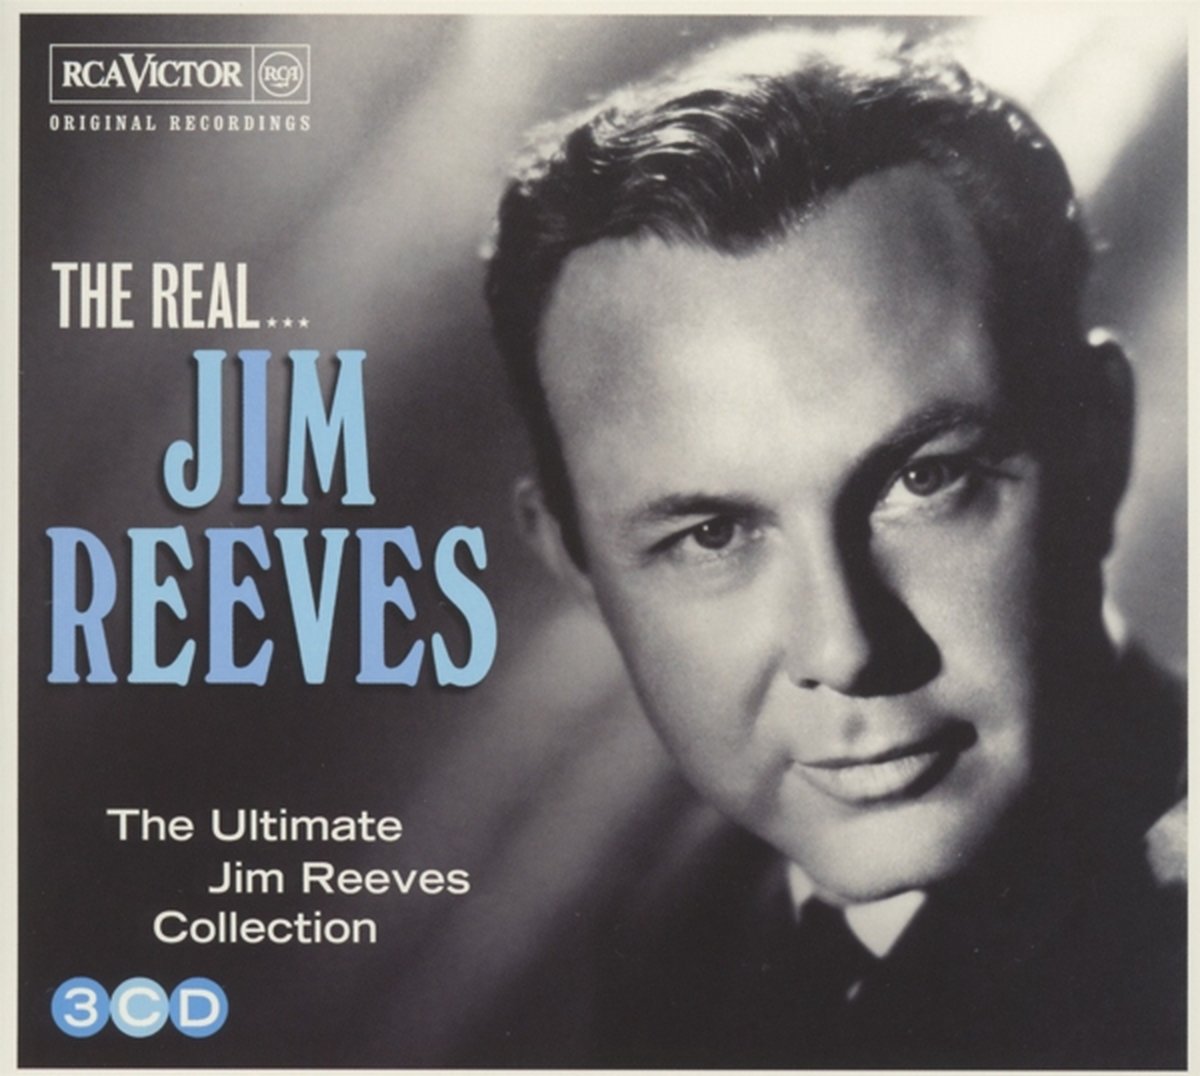 The Real... Jim Reeves (The Ultimate Collection) - Jim Reeves